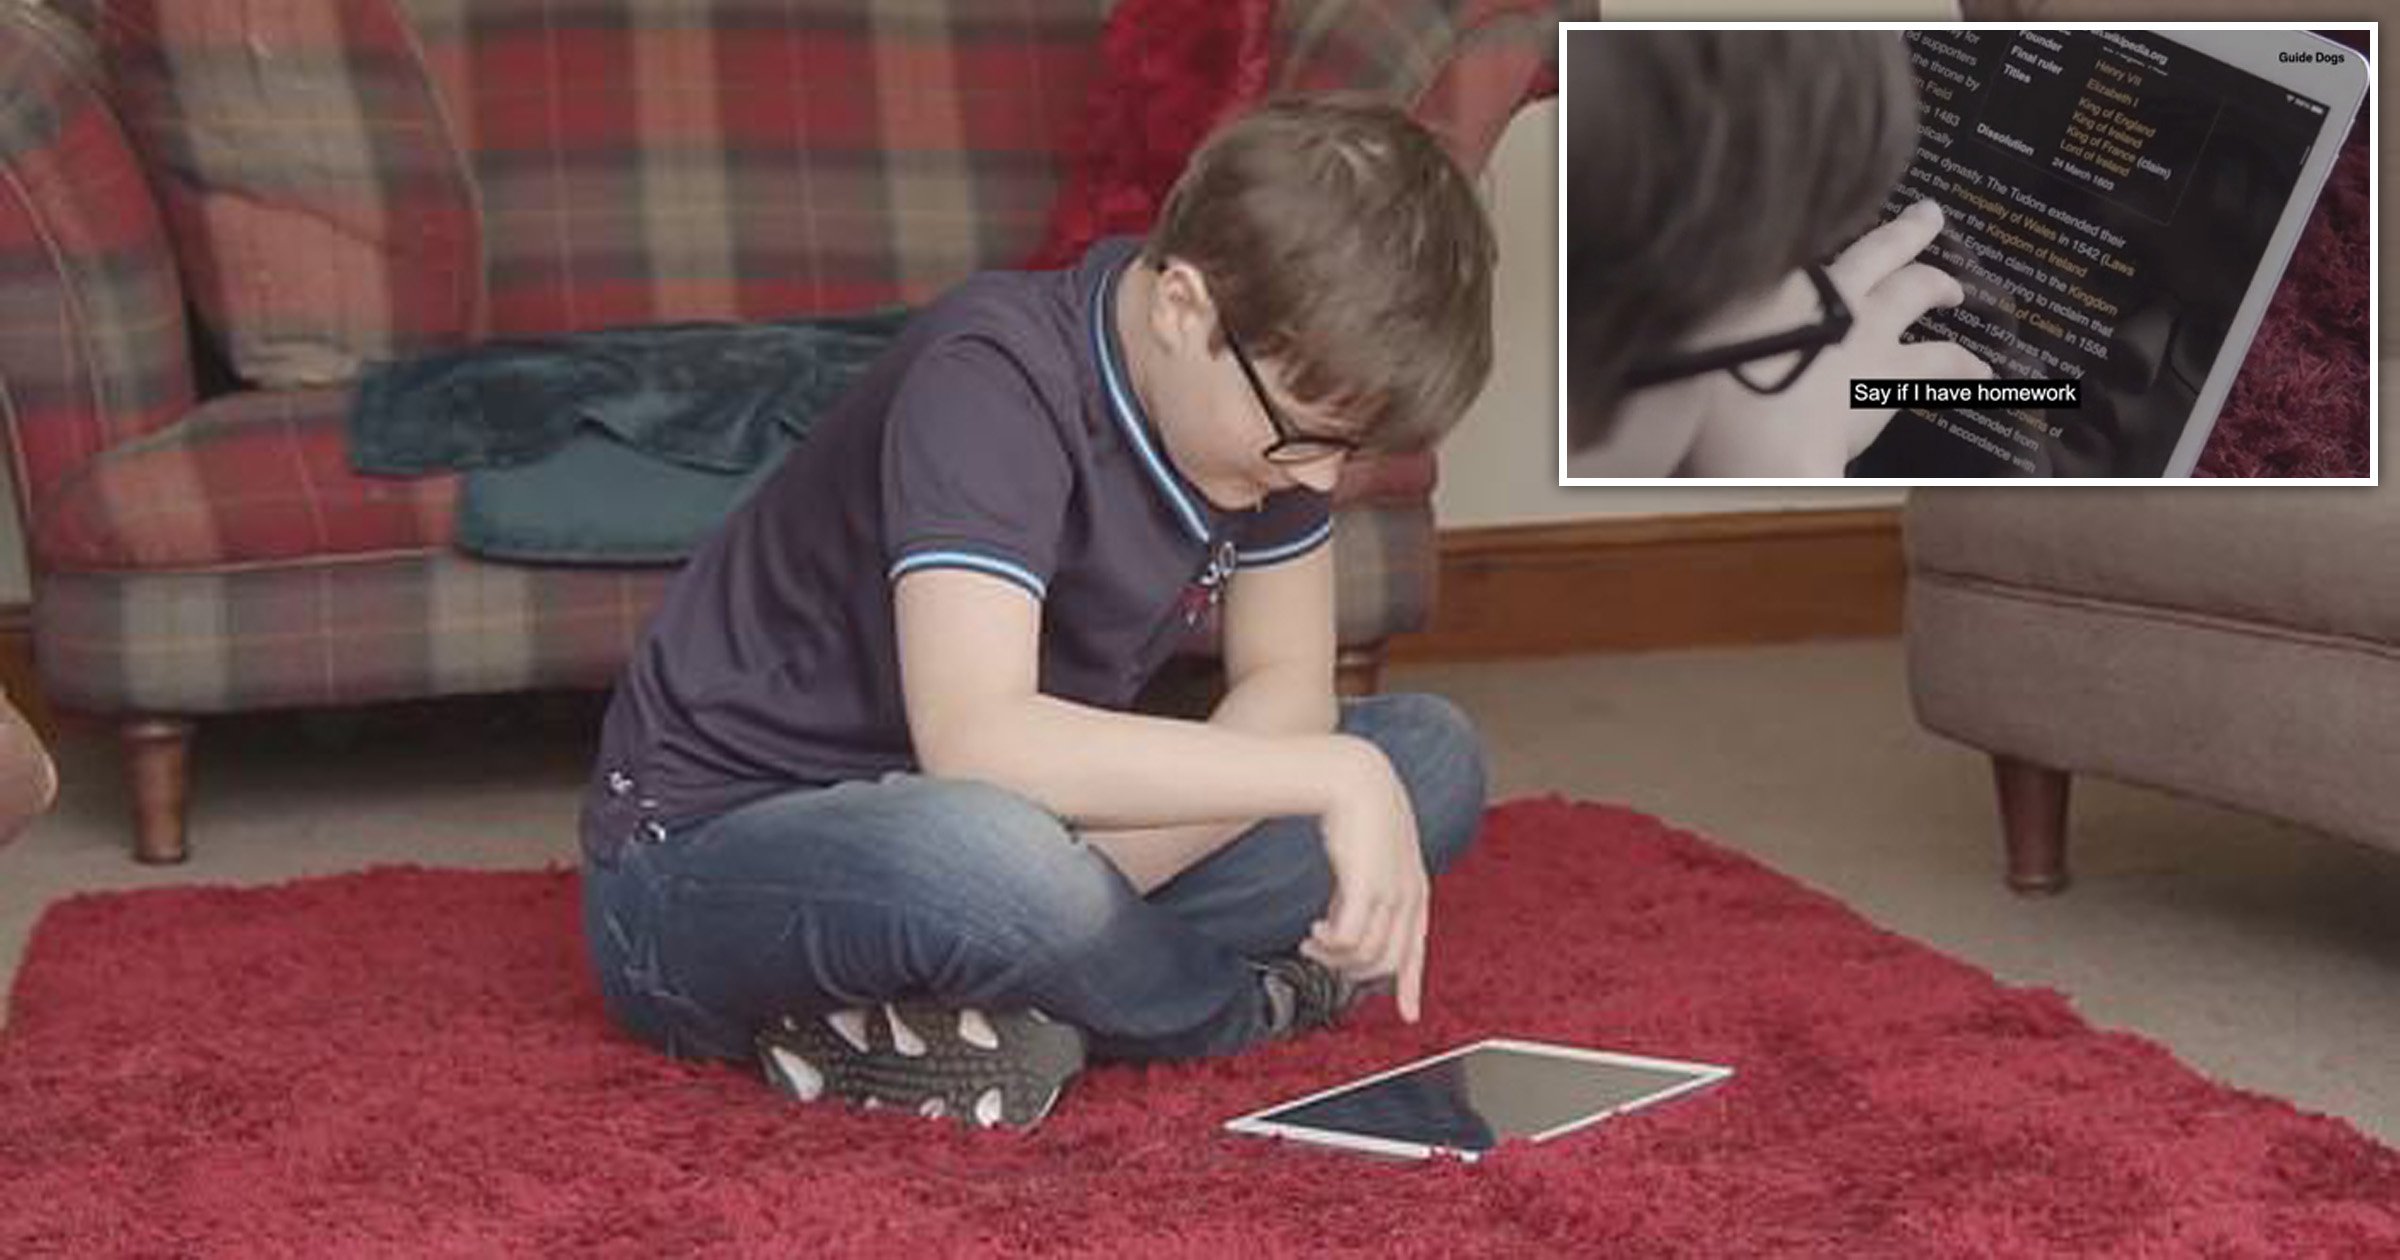 UK charity Guide Dogs is giving away 2,500 iPads to visually impaired children